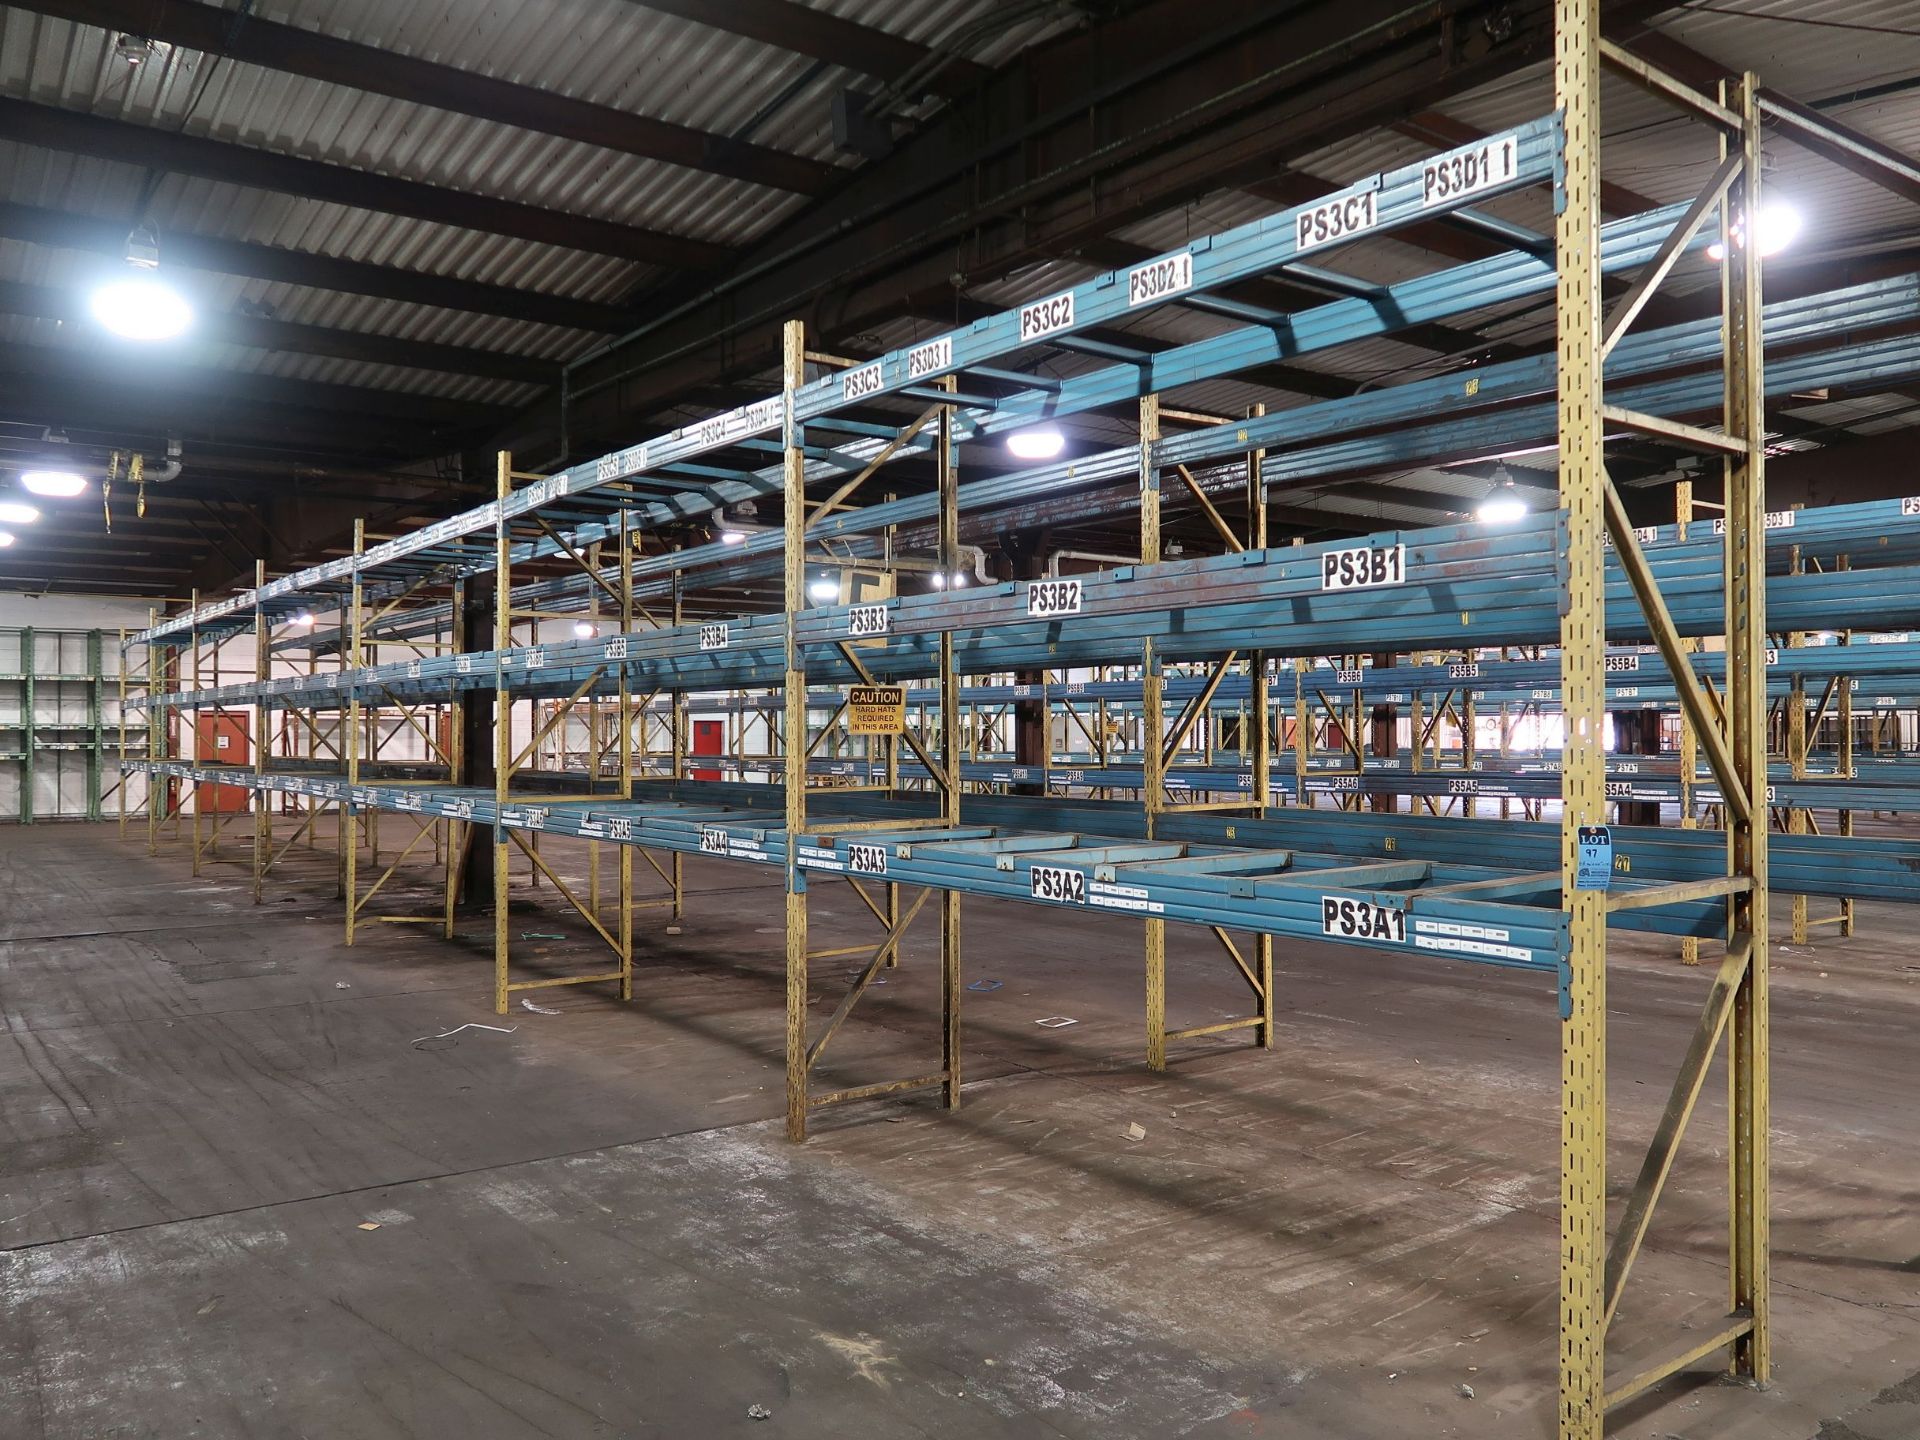 SECTIONS 36" X 144" X 132" ADJUSTABLE BEAM PALLET RACK WITH (8) 36" X 132" UPRIGHTS, (42) 144" CROSS